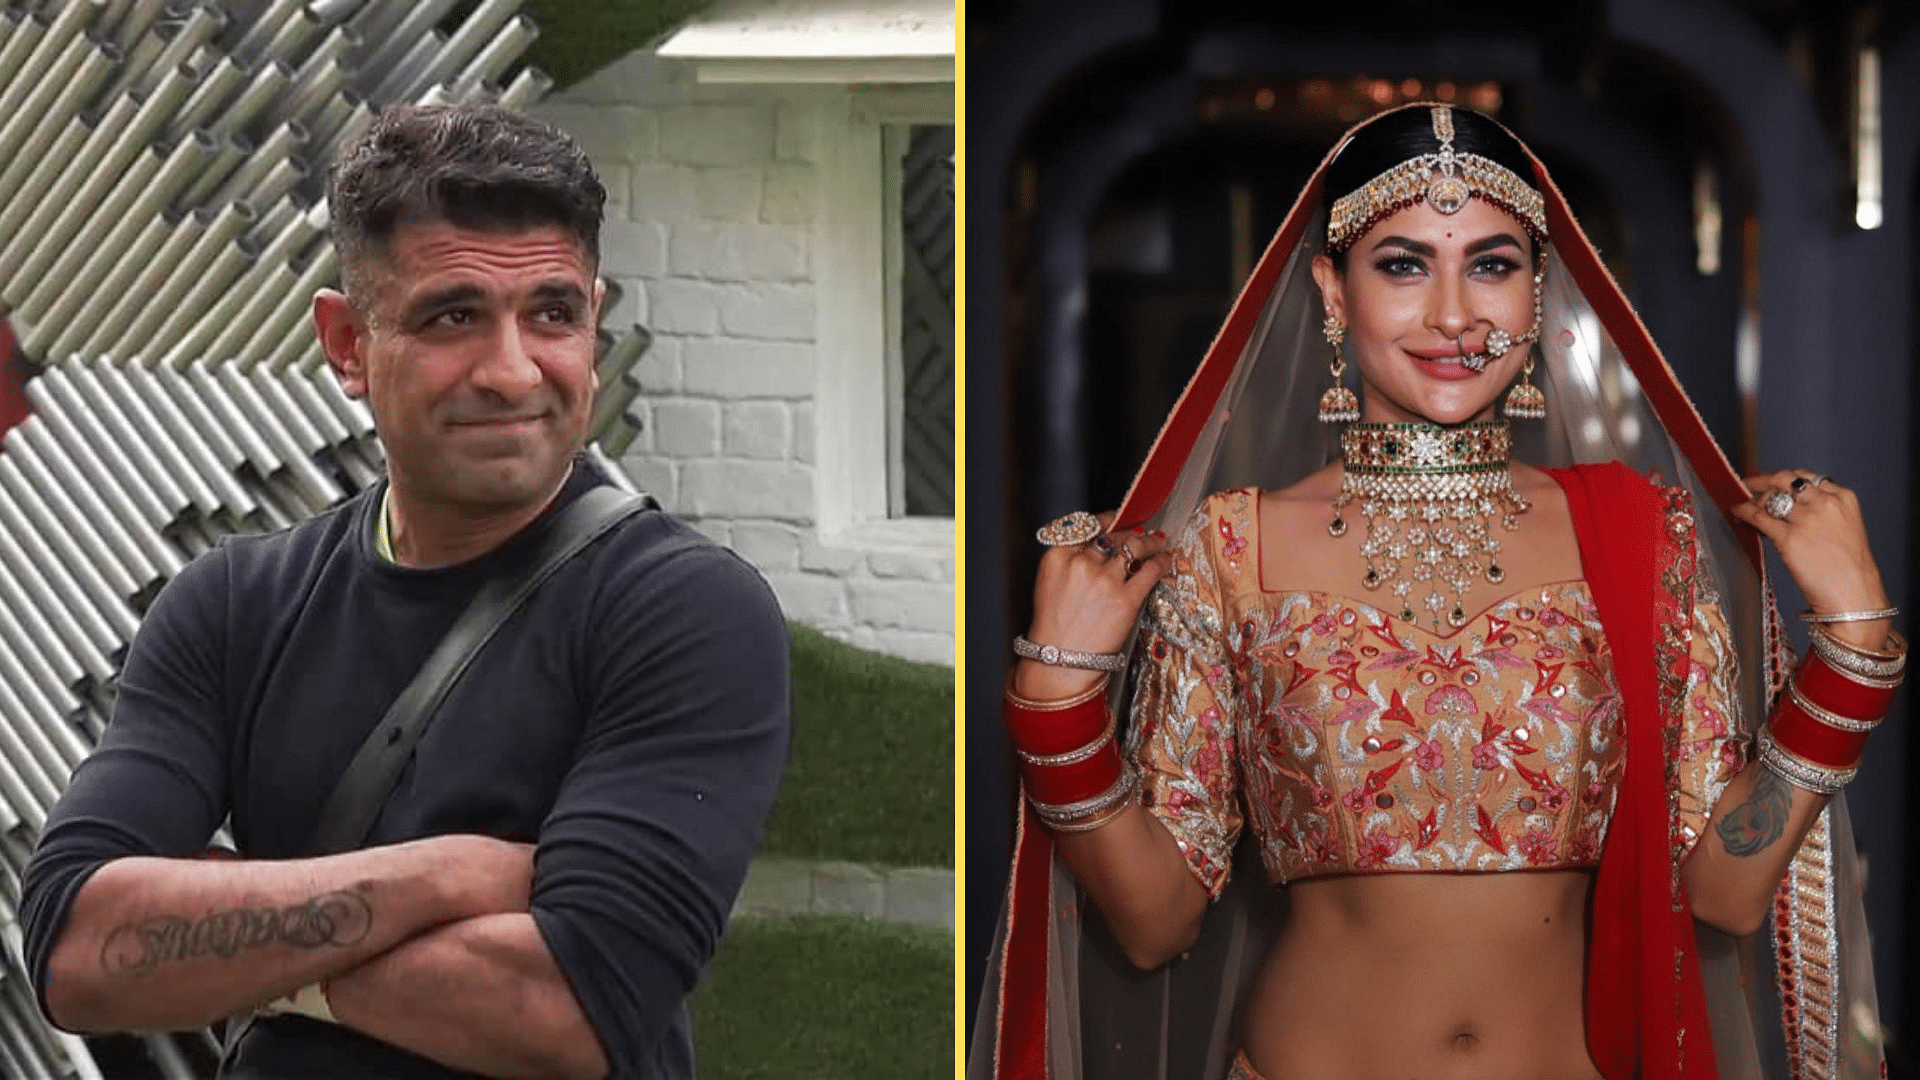 <i>Bigg Boss 14</i> contestants Eijaz Khan and Pavitra Punia have said they will wed this year.